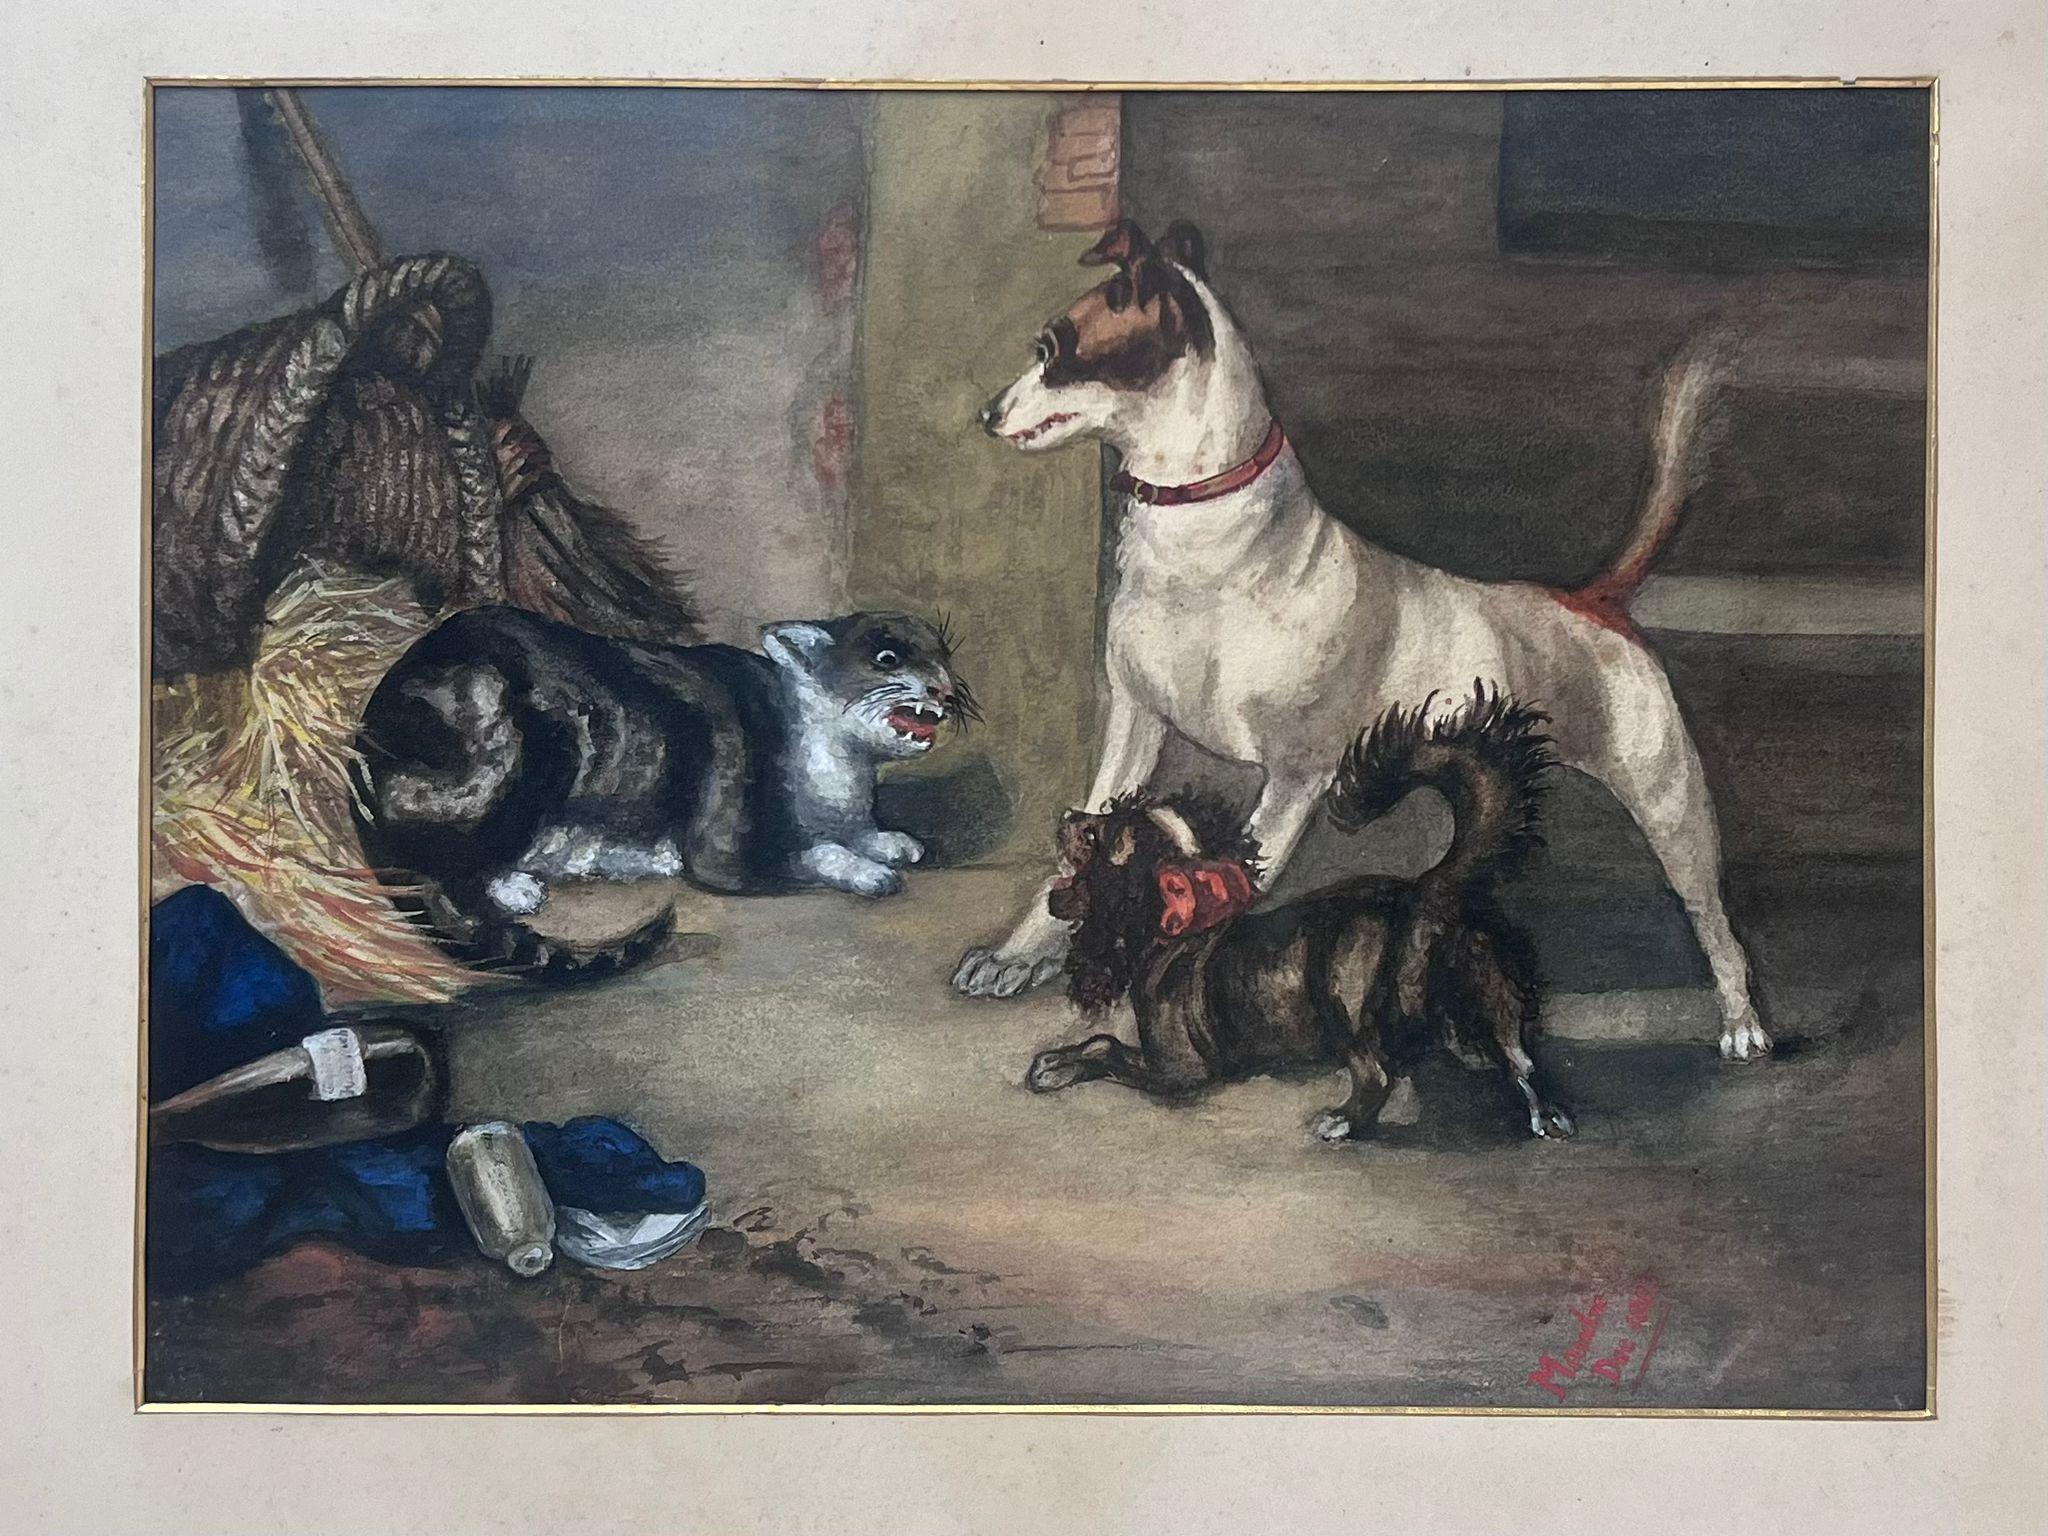 Victorian Animal Artist Animal Painting - Antique Signed English Painting Dogs & Cat Fighting in Barn Stable Interior